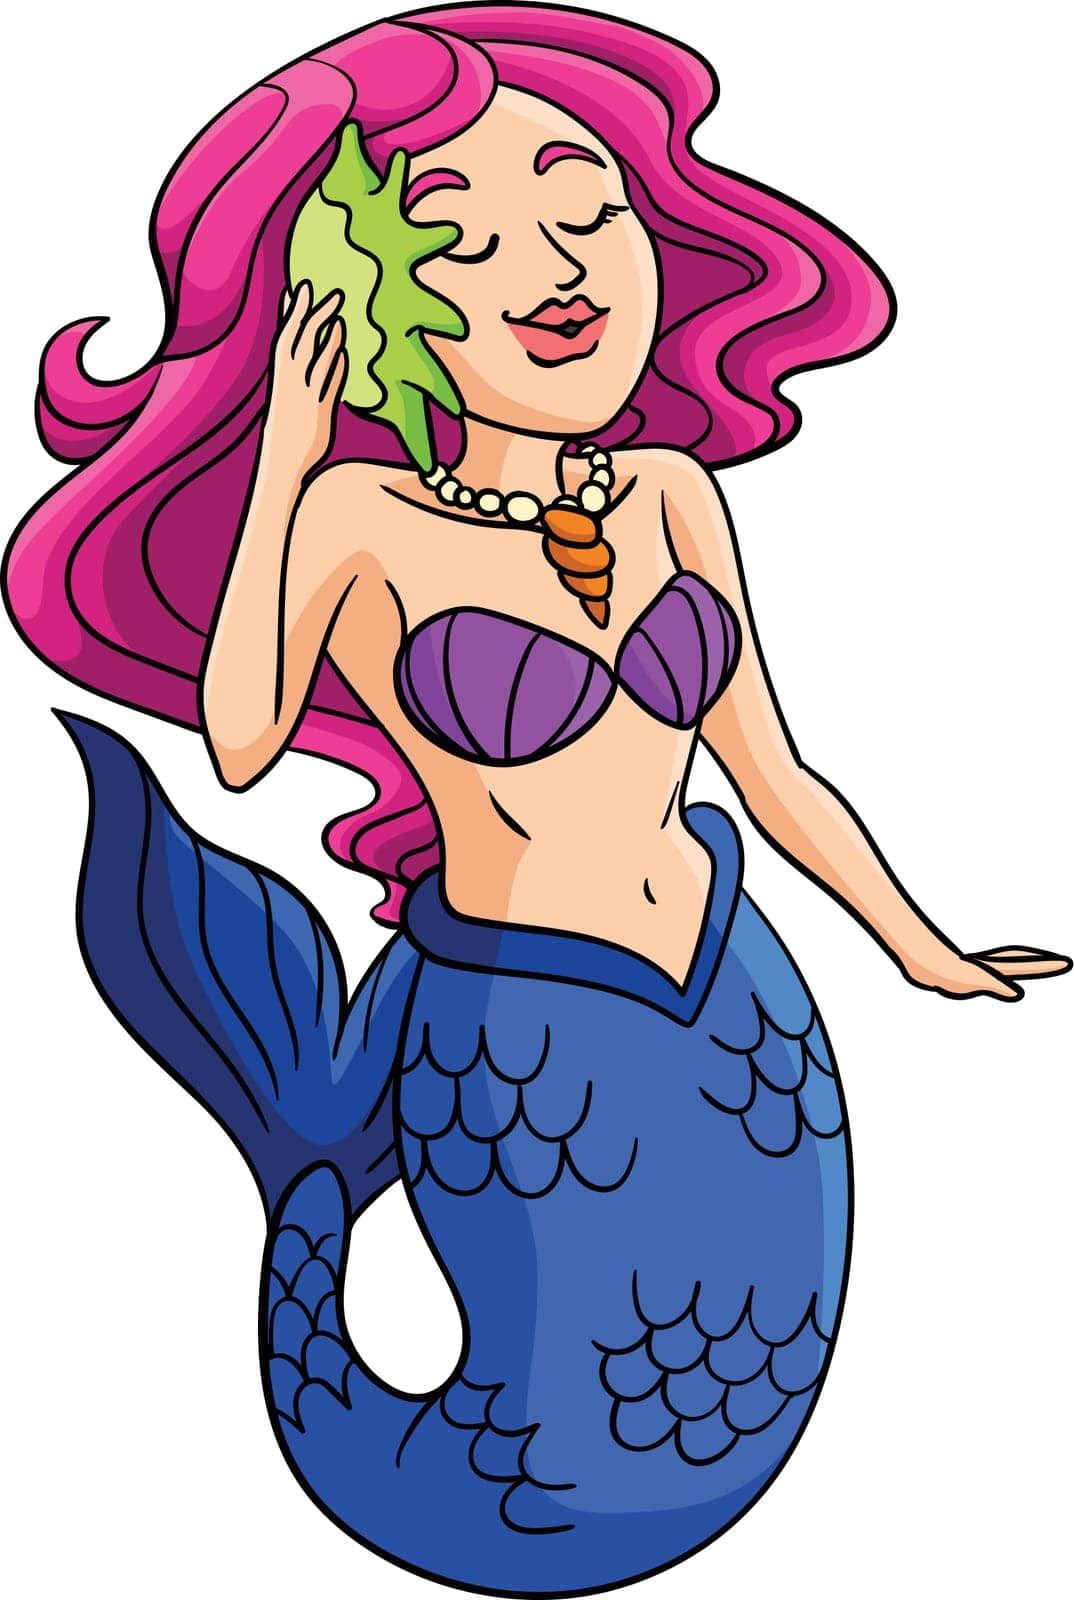 Beautiful Mermaid Cartoon Colored Clipart by abbydesign